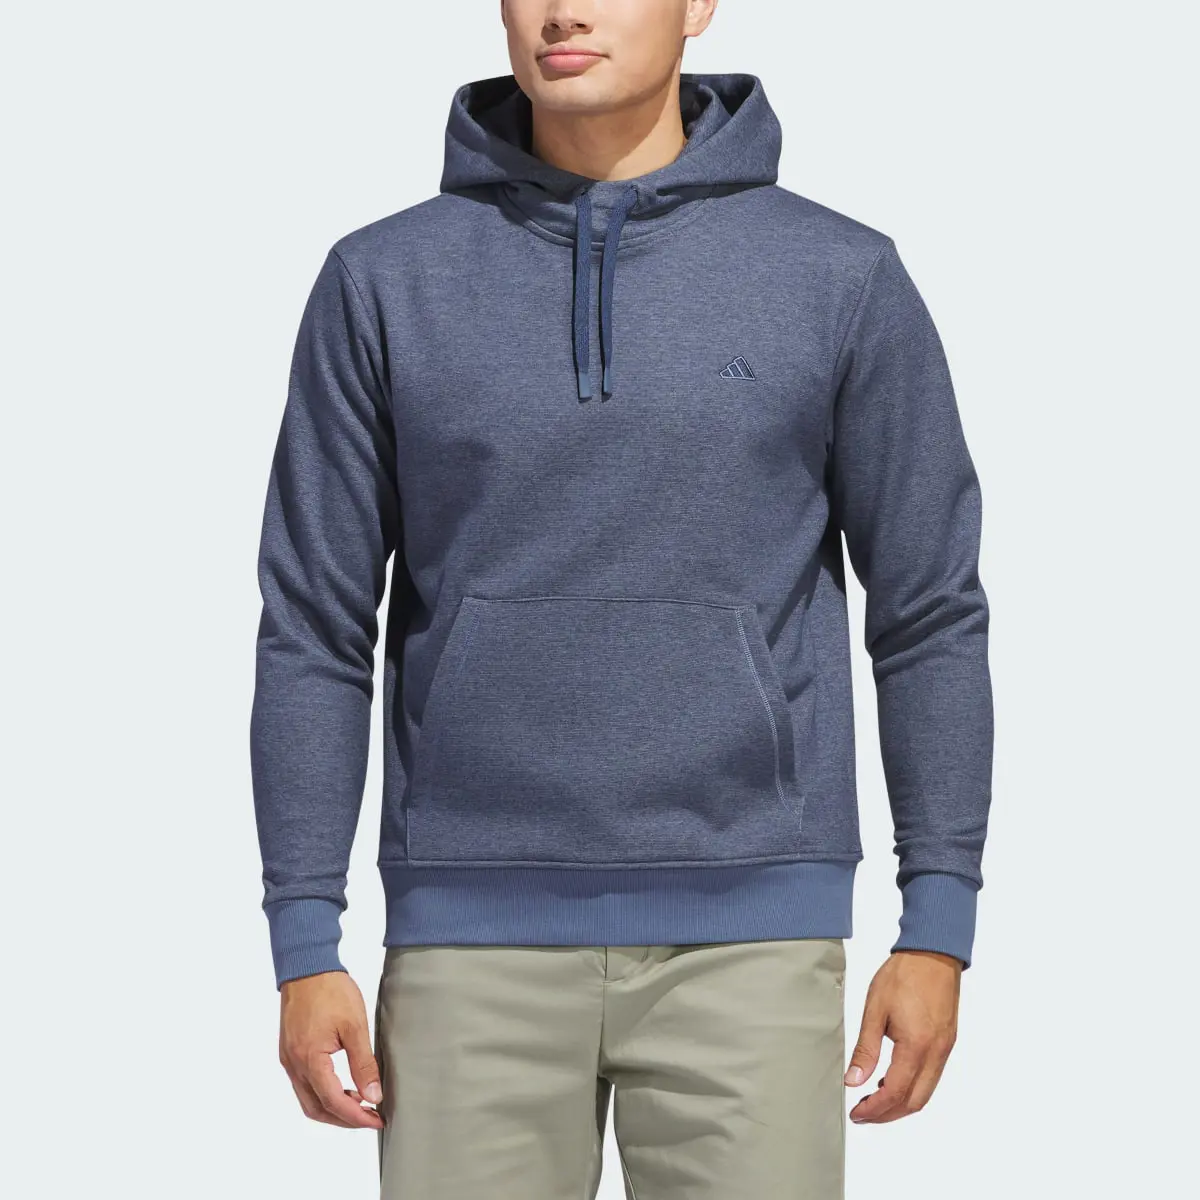 Adidas Go-To Hoodie. 1